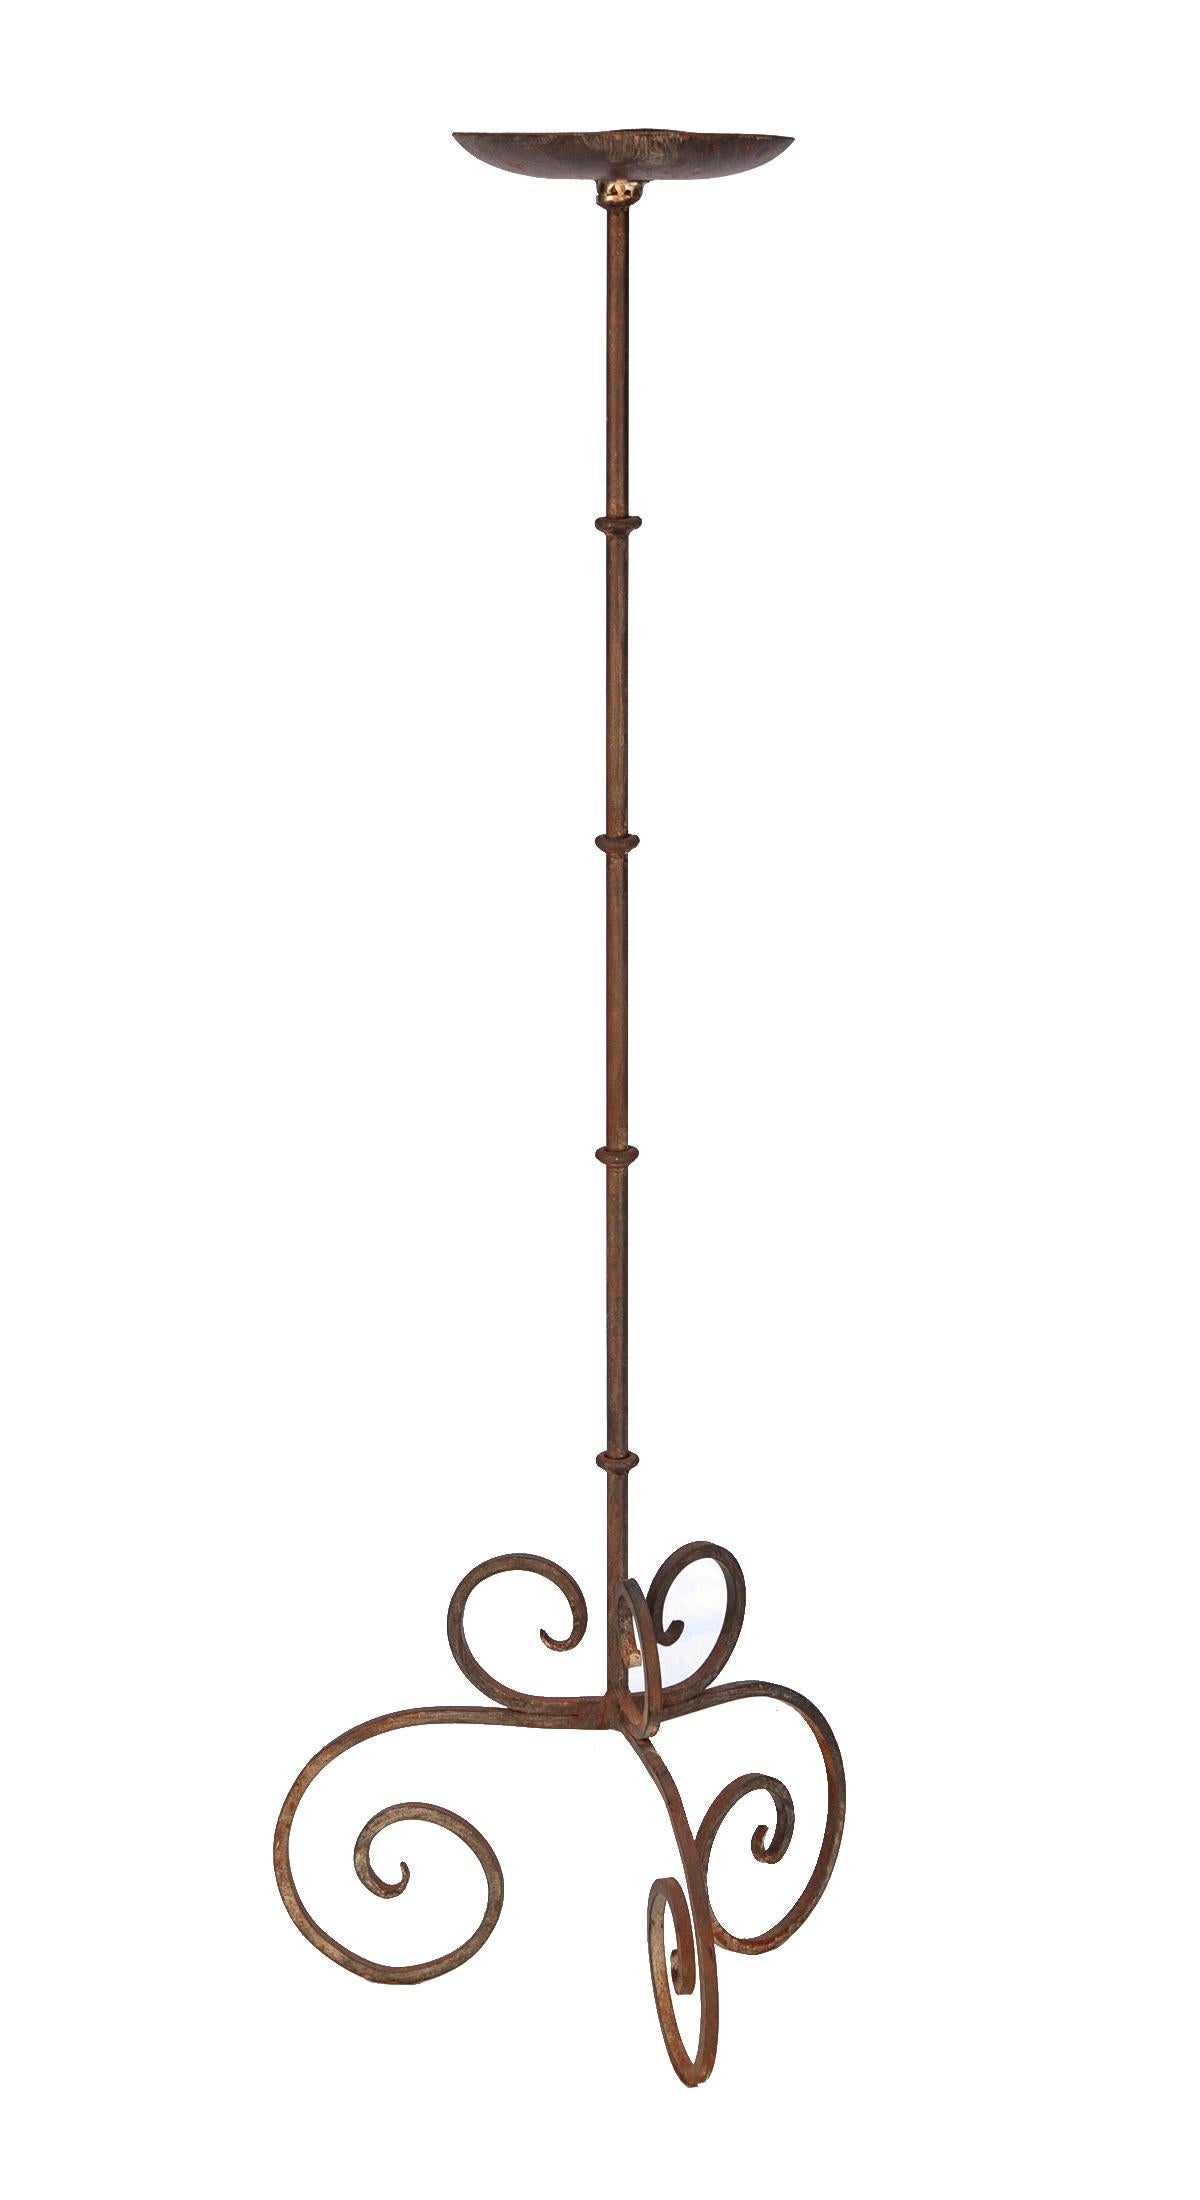 Hand-Crafted Hand Wrought Iron Candle Stand